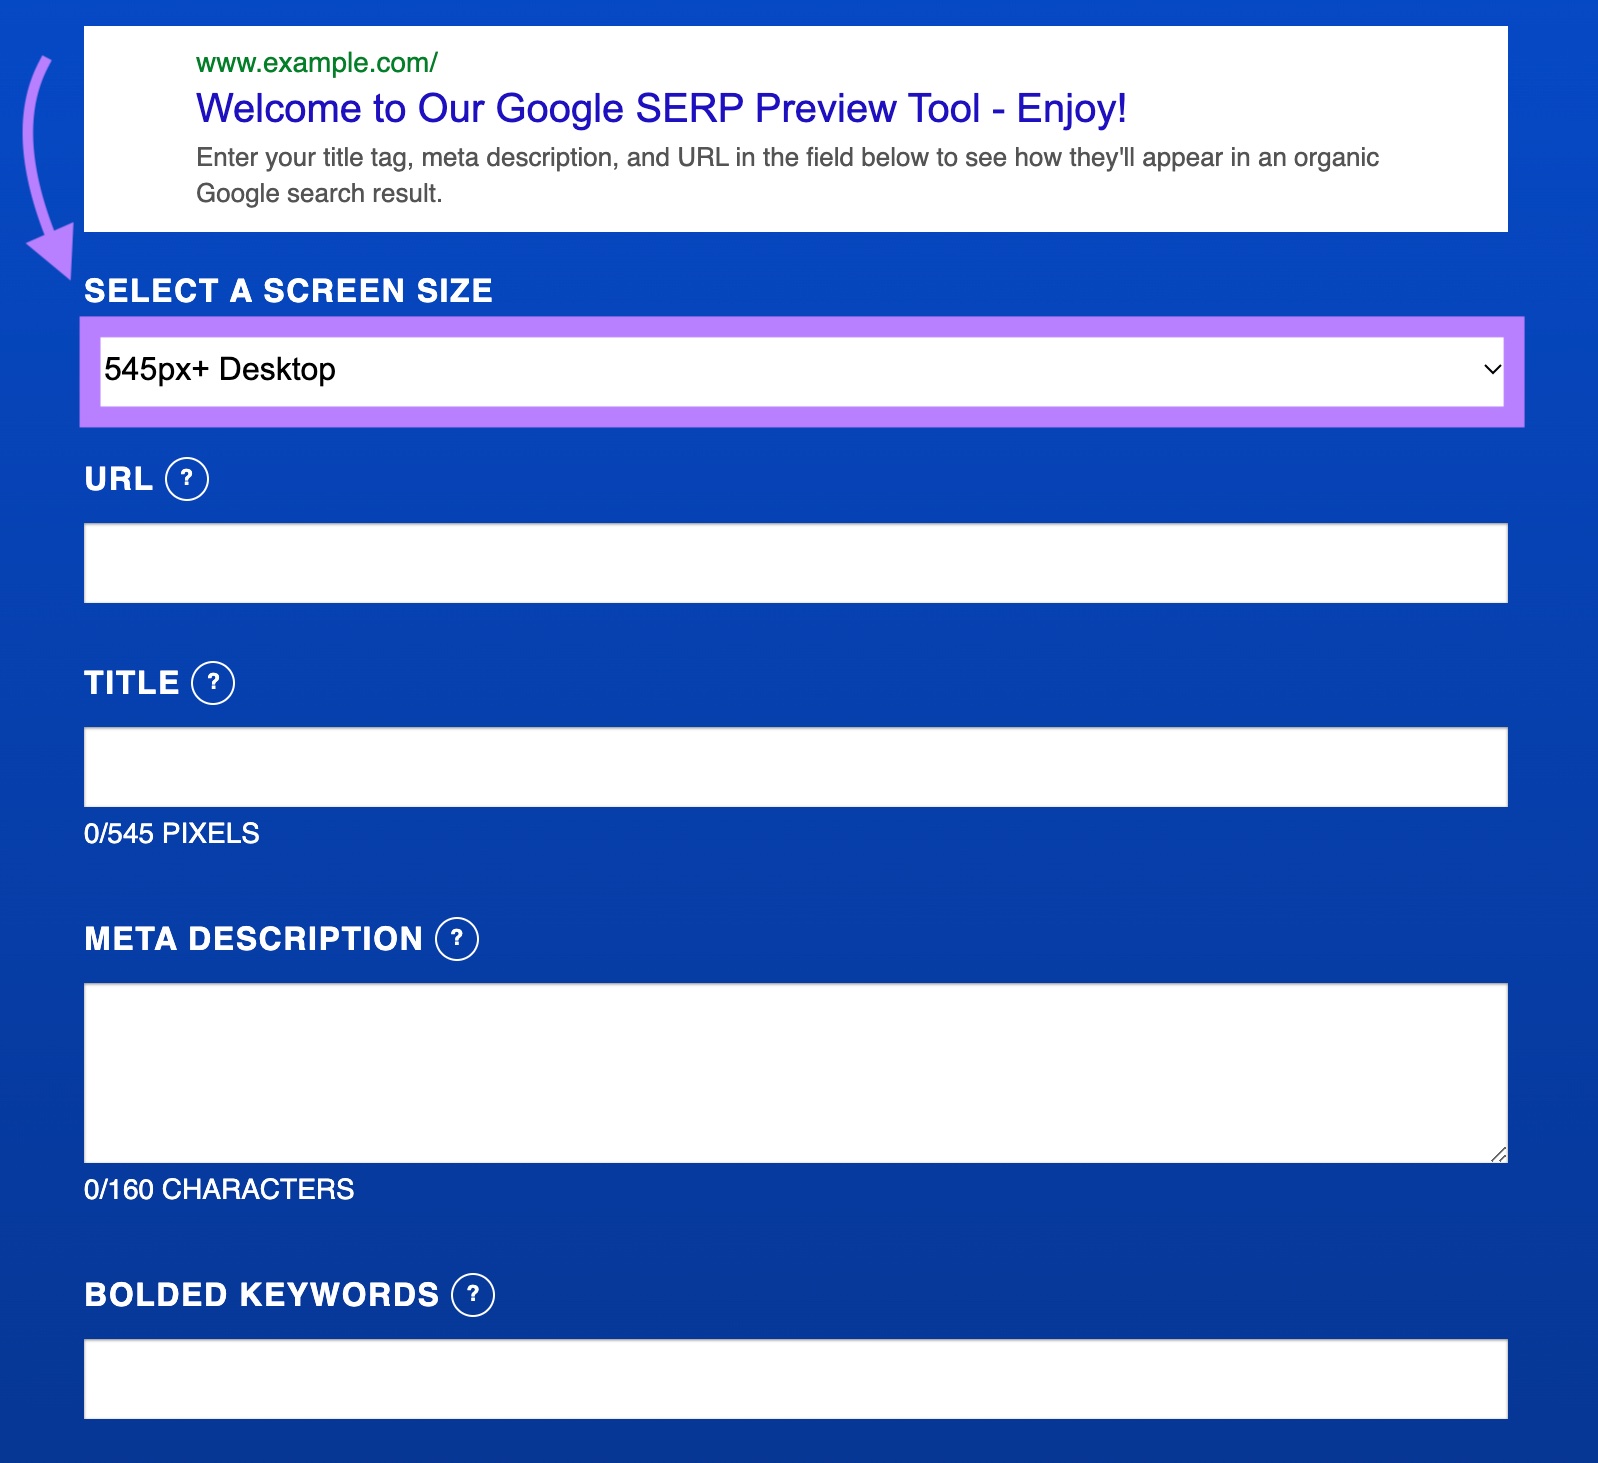 A preview shown in Portent’s SERP Preview Tool